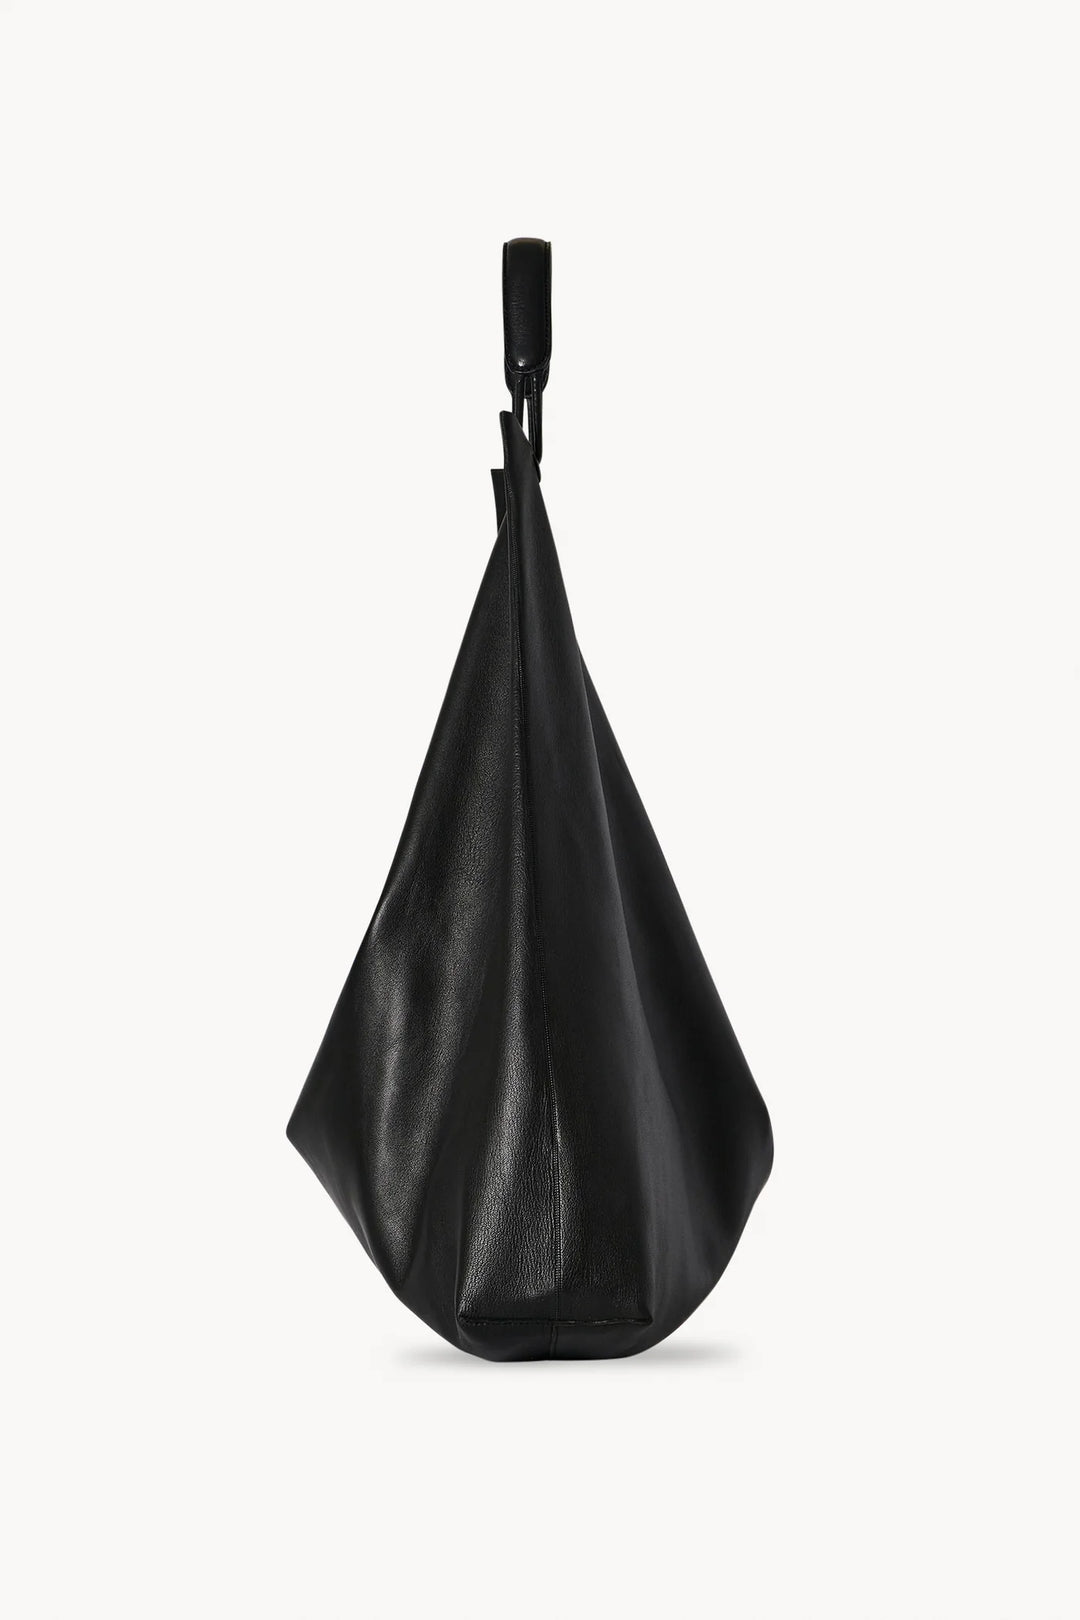 THE ROW BINDLE 3 BAG IN LEATHER